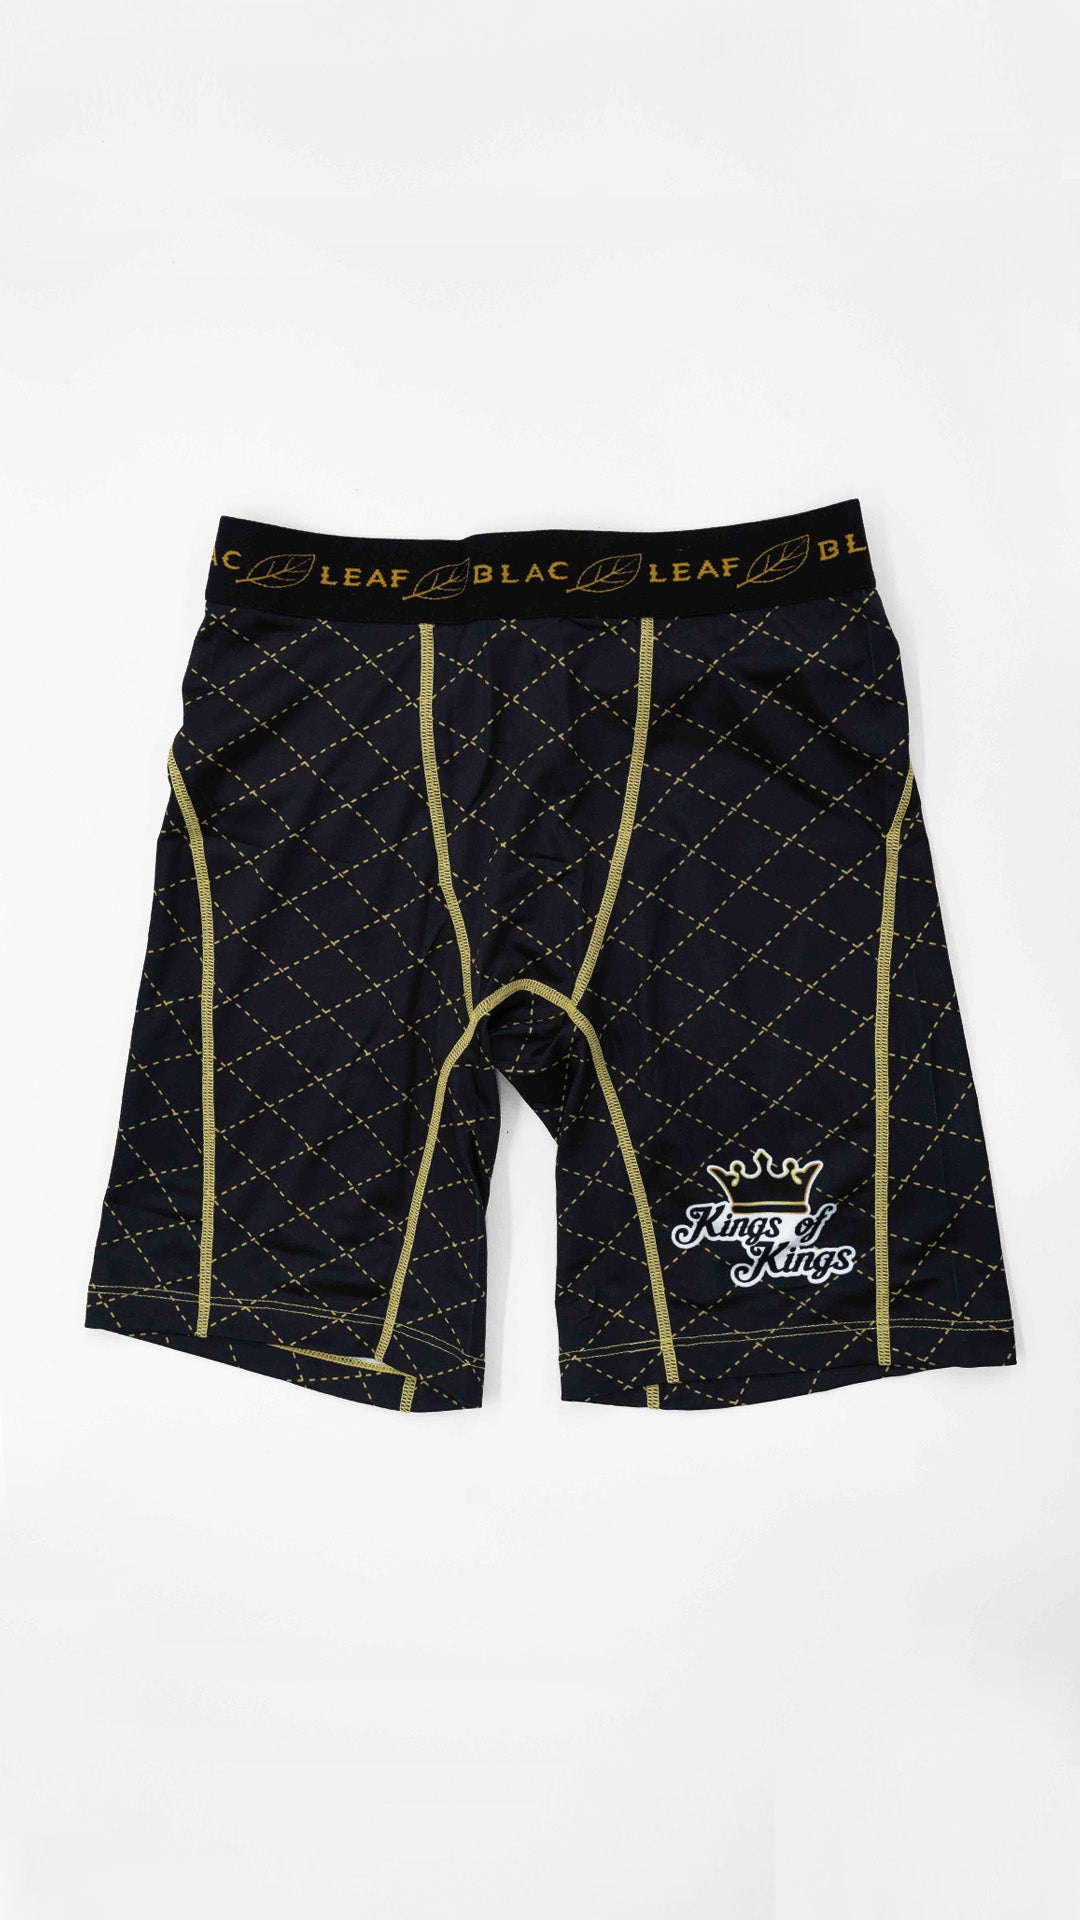 King Of Kings Boxer Briefs